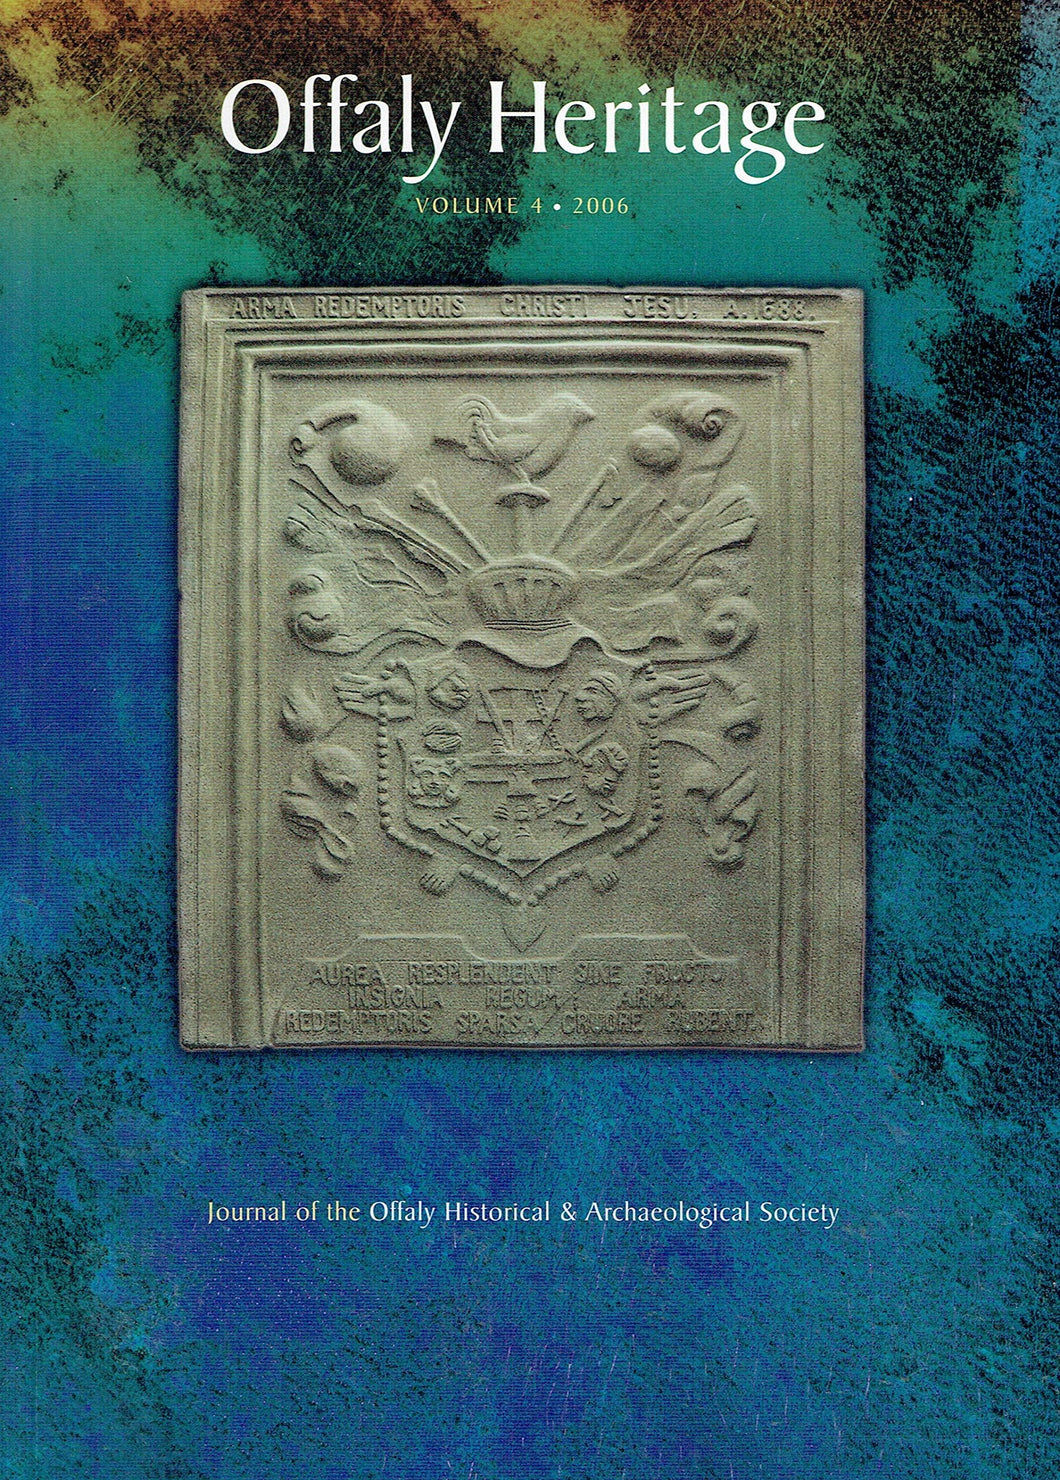 Offaly Heritage Vol. 4 Journal Of The Offaly Historical & Archaeological Society